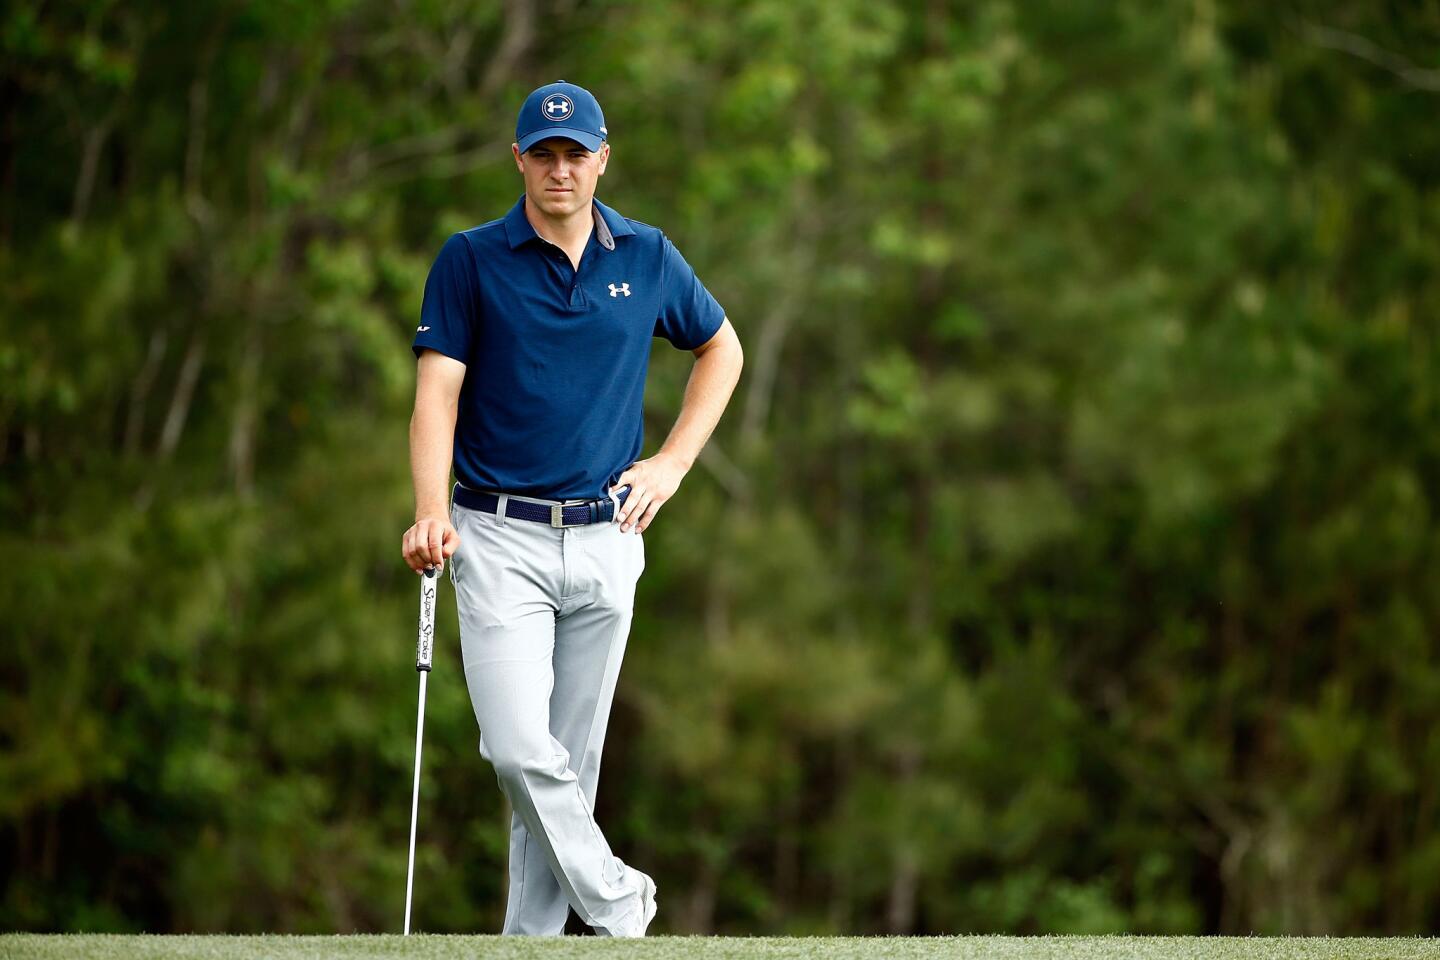 Jordan Spieth waits on the eighth green during the first round of the Shell Houston Open at the Golf Club of Houston on March 31, 2016.